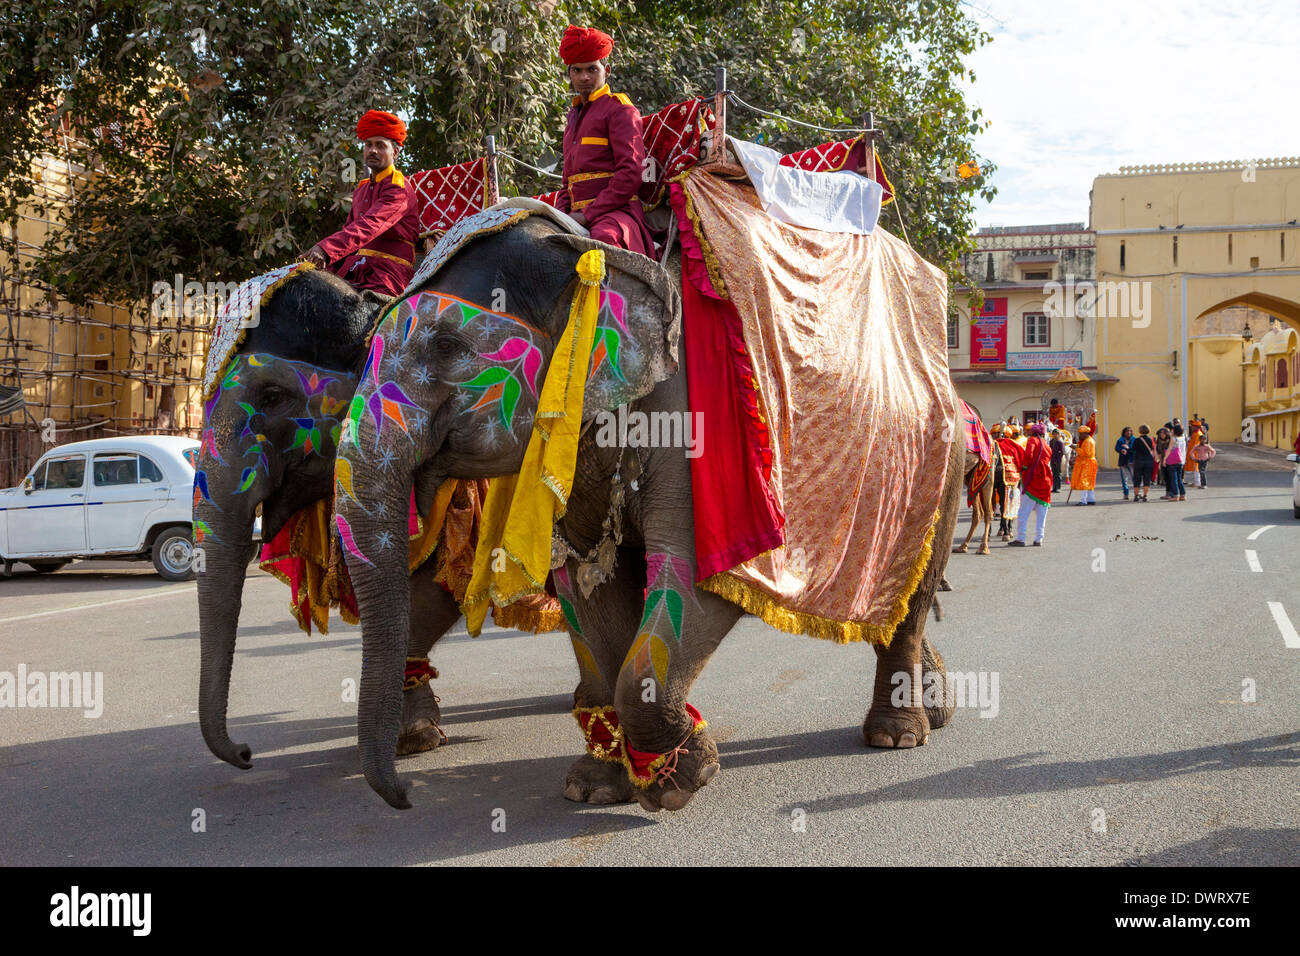 Jaipur, Rajasthan, India. Elephants Moving into Place to Lead a Wedding Procession. Stock Photo